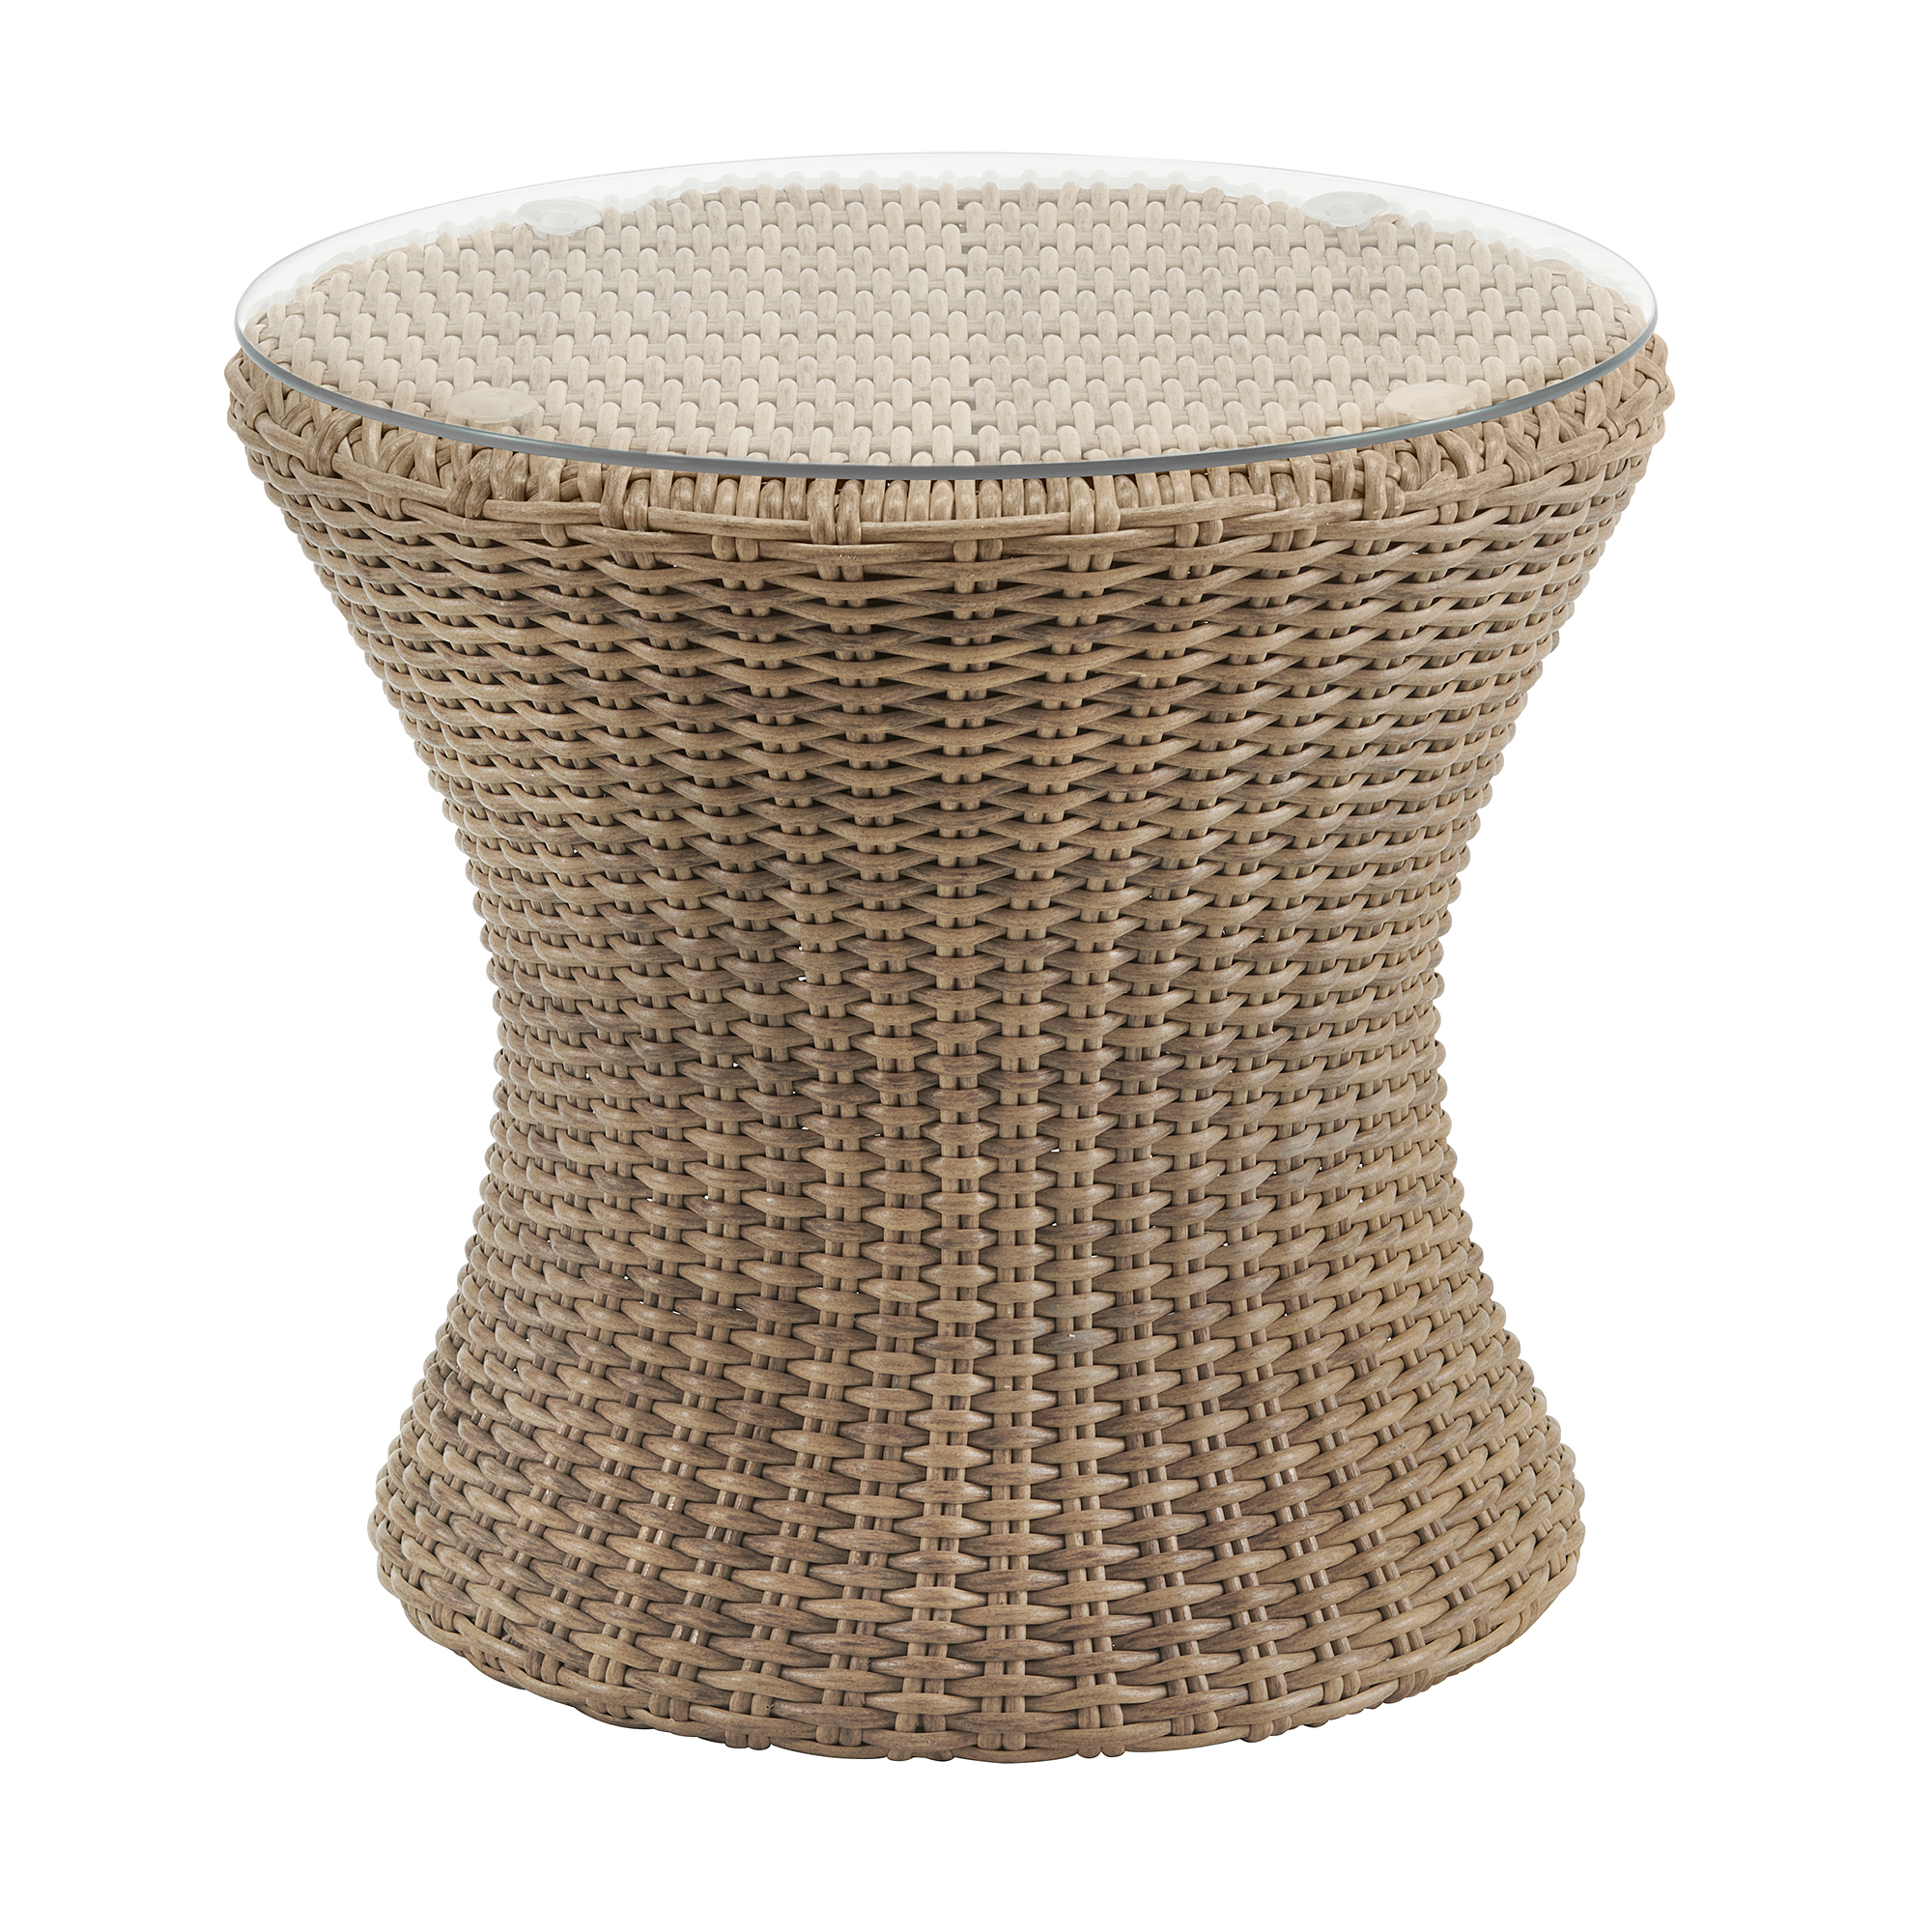 Strafford All-Weather Wicker Outdoor Set with Two Chairs and 18"H Cocktail Table - image 5 of 6